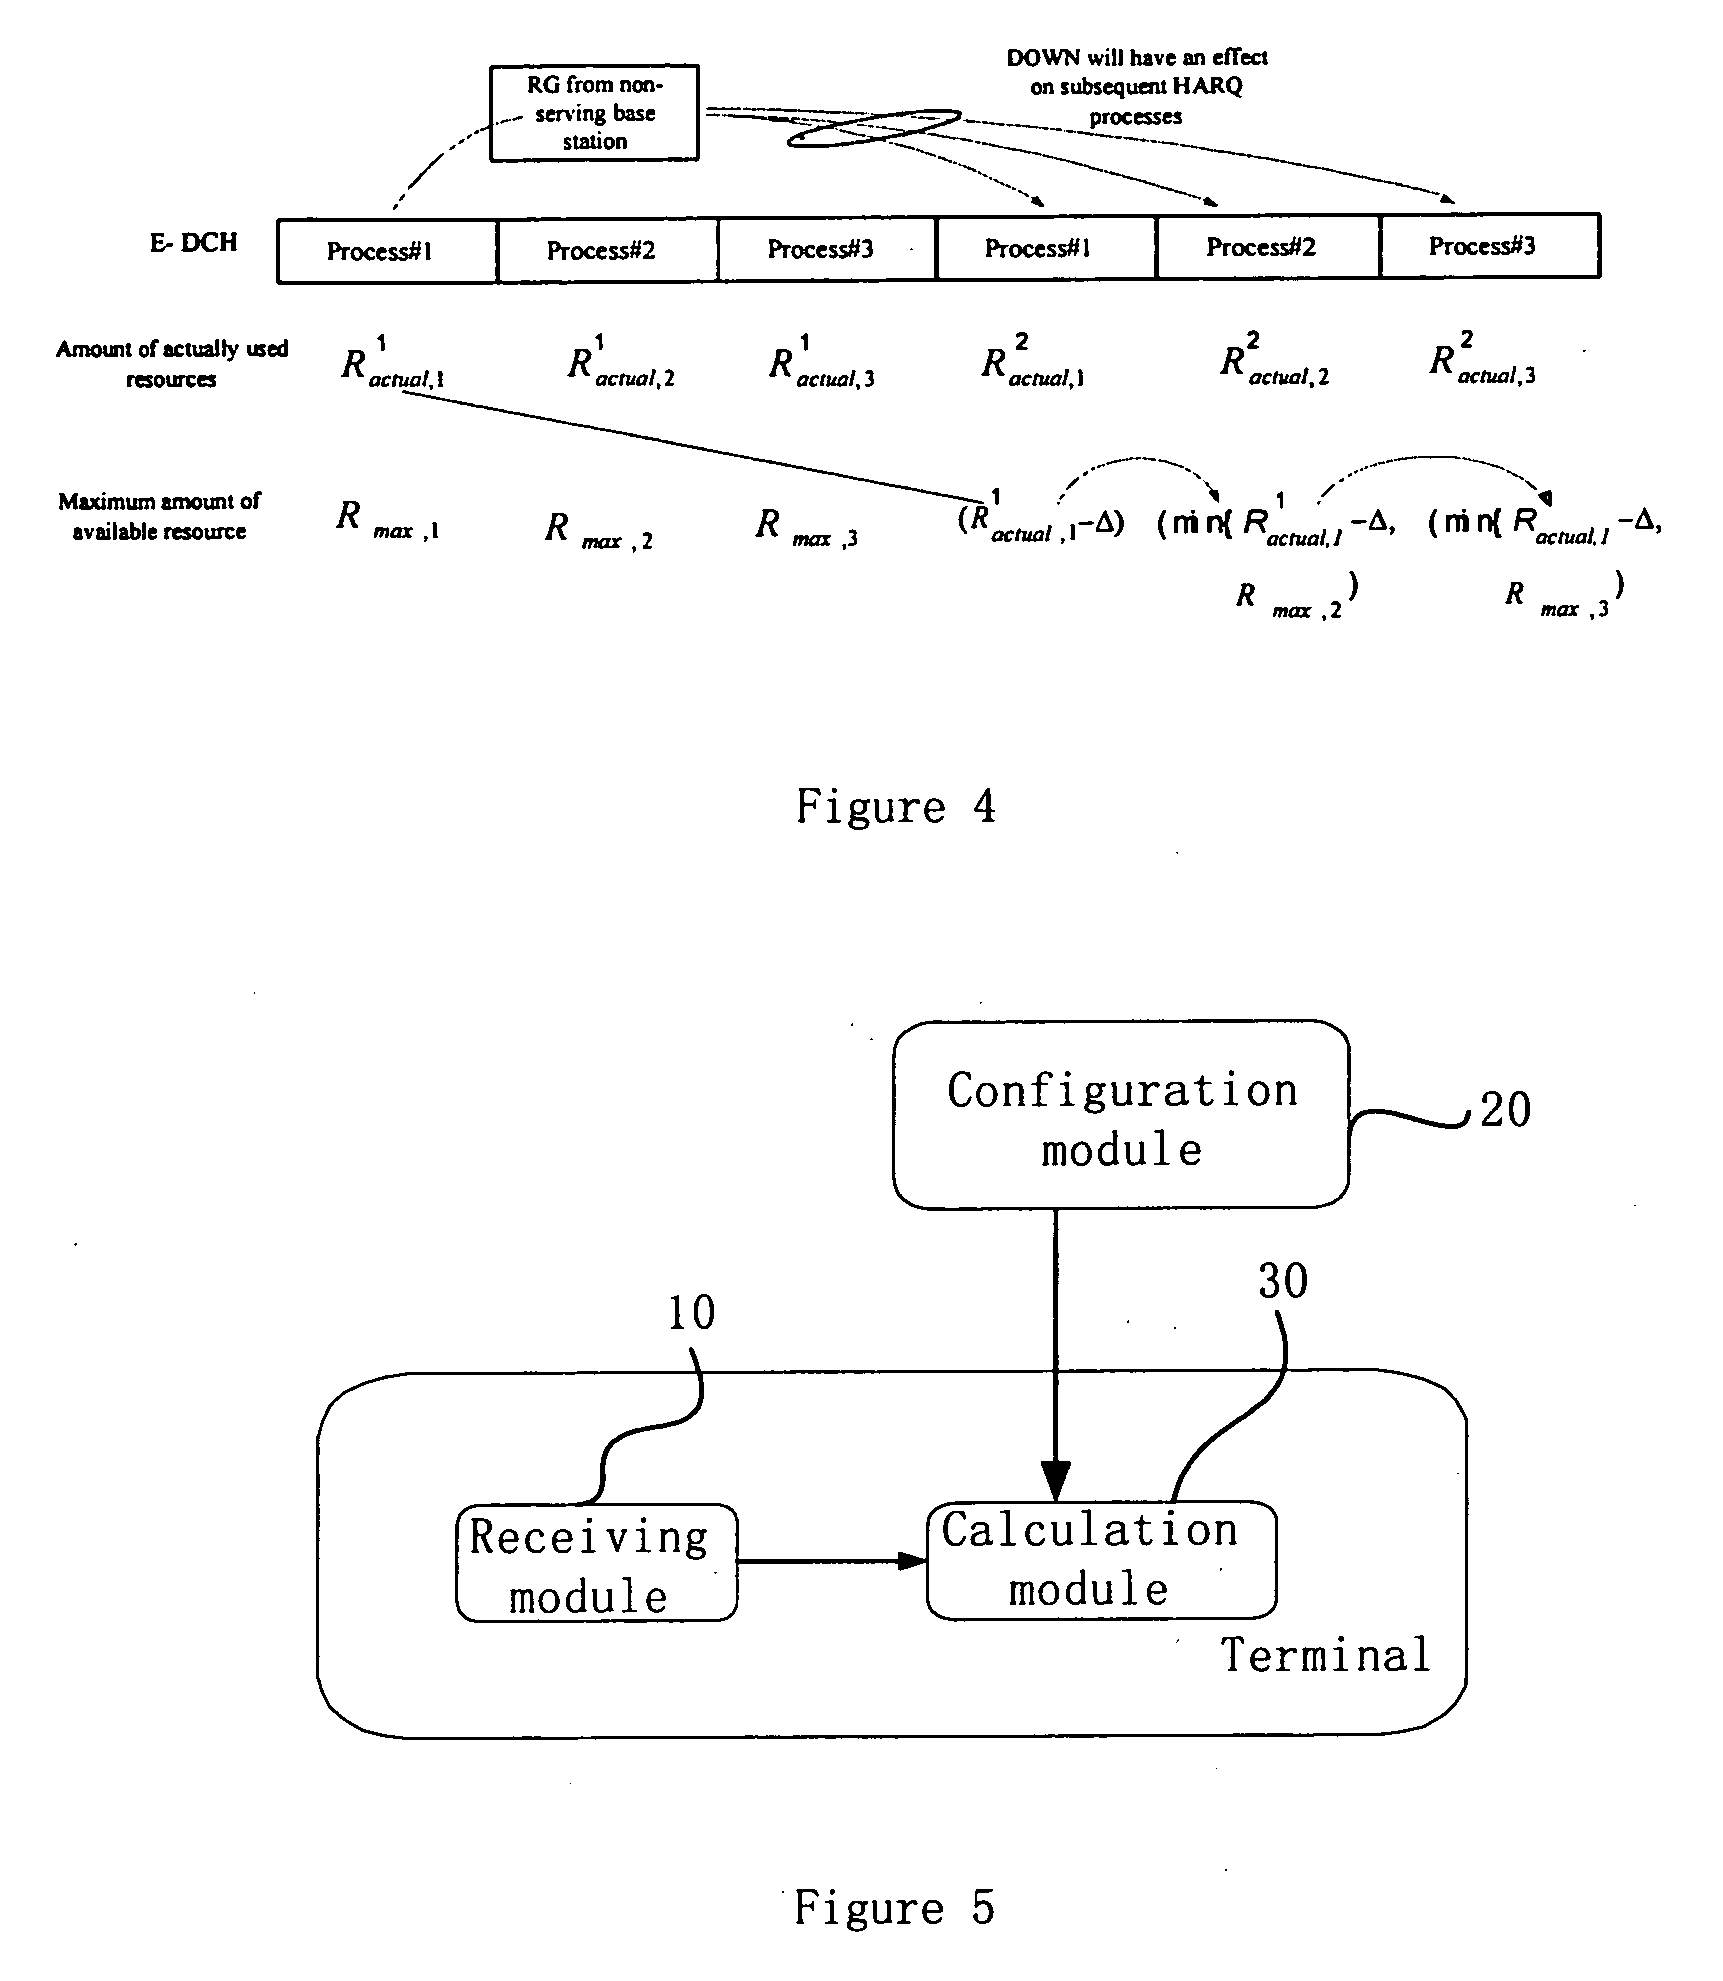 Method and apparatus for operation of a terminal based on relative grant of a non-serving base station